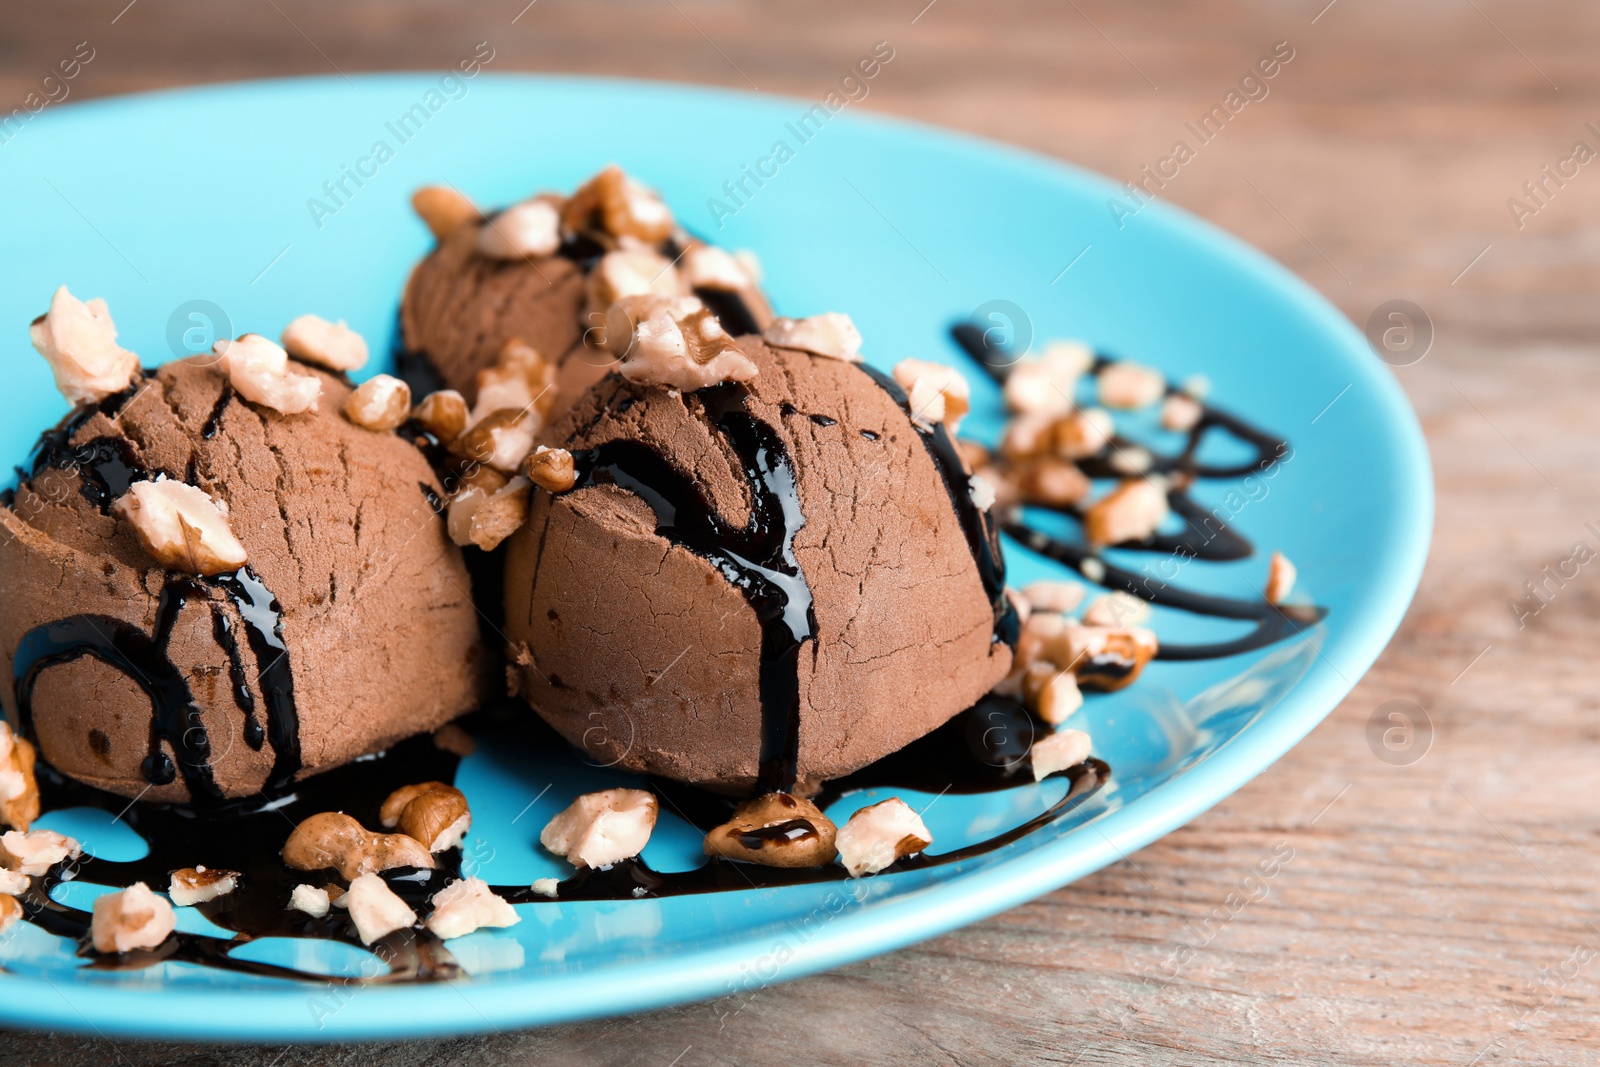 Photo of Plate of chocolate ice cream with nuts on wooden table, closeup. Space for text